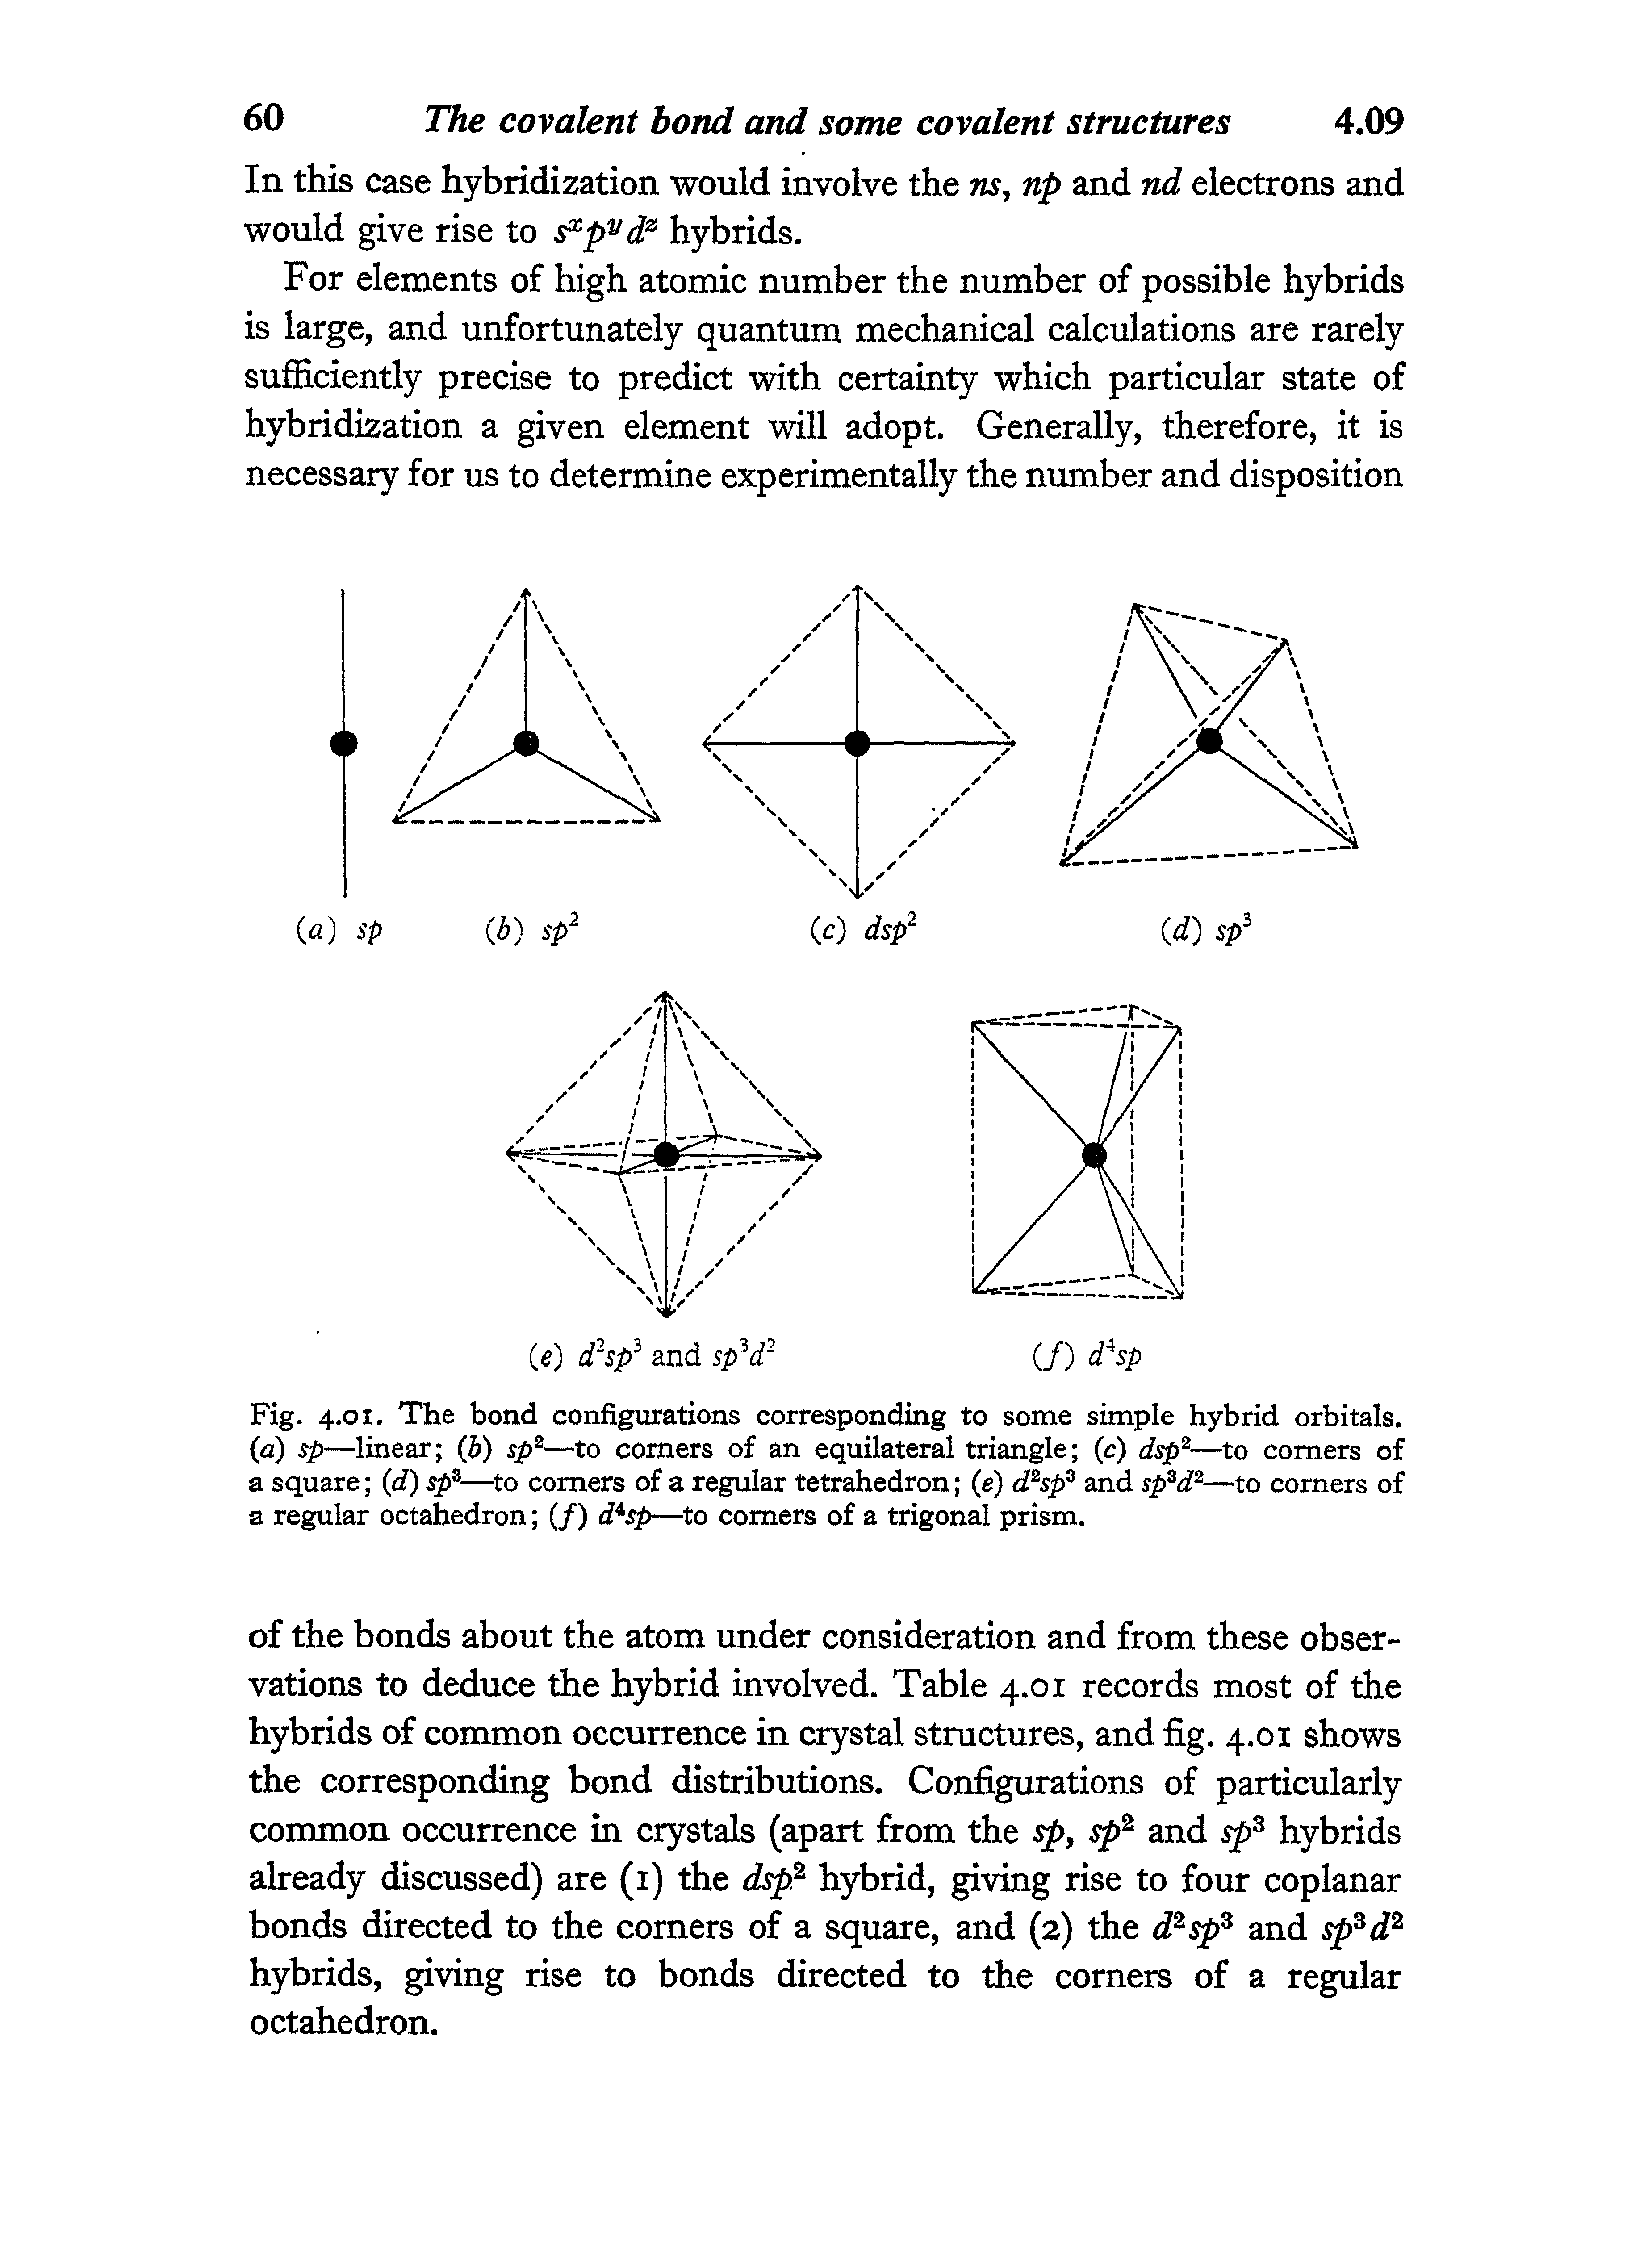 Fig. 4.01. The bond configurations corresponding to some simple hybrid orbitals. (<2) sp—linear (b) sp2—to comers of an equilateral triangle (c) dsp2—to comers of a square (d) spz—to comers of a regular tetrahedron (e) d2spz and sp3d2—to comers of a regular octahedron (/) d sp—to comers of a trigonal prism.